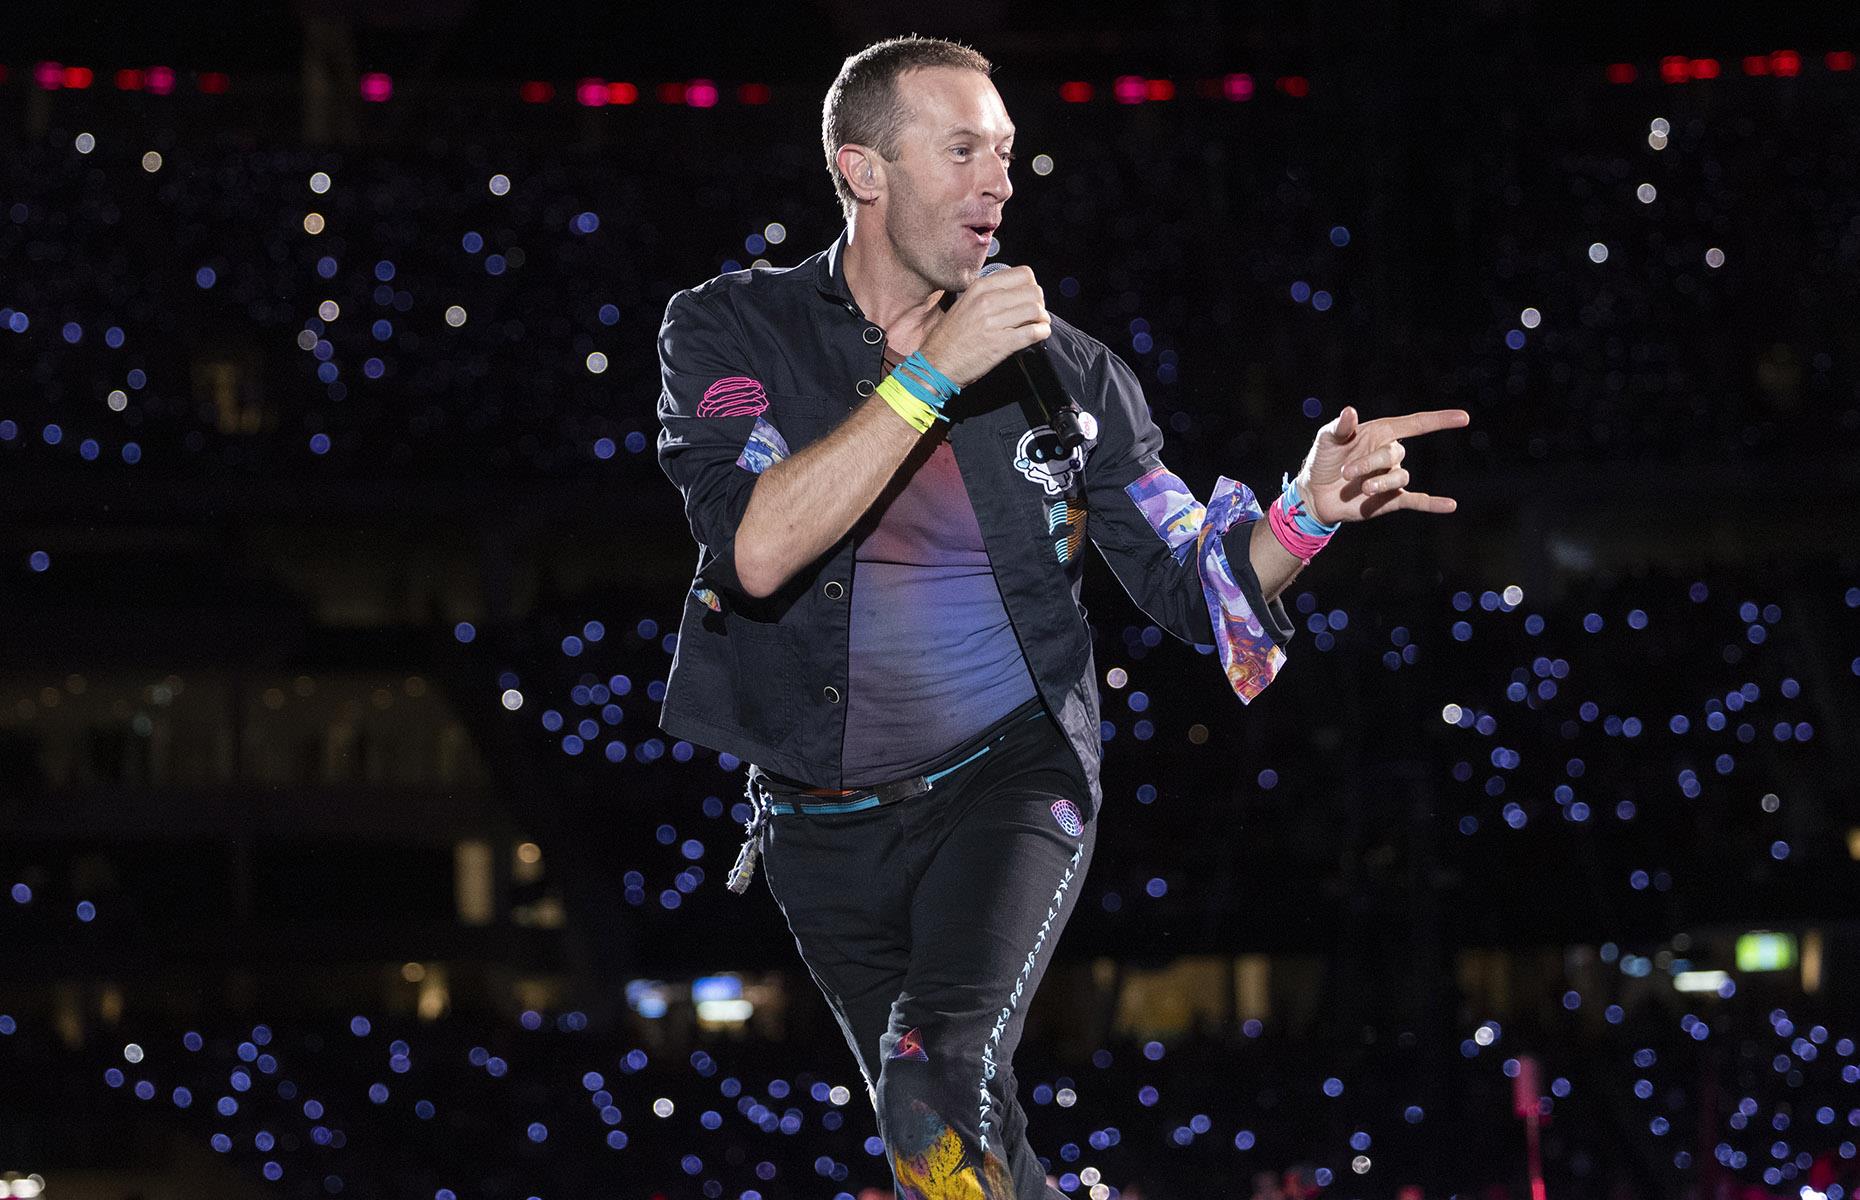 <p>Next on our list is Coldplay, again, with the band's ongoing <em>Music of the Spheres Tour </em>kicking off in March 2022.</p>  <p>By the time it wraps in November of this year the mammoth jaunt will have included more than 170 performances across five continents. At the time of writing, it's already grossed a juicy $810 million. </p>  <p>However, by the time the final curtain falls on this epic tour, it's anticipated to gross over $1 billion. If so, Coldplay will make history as the first band to achieve the feat of passing the billion-dollar gross mark (not factoring in inflation).</p>